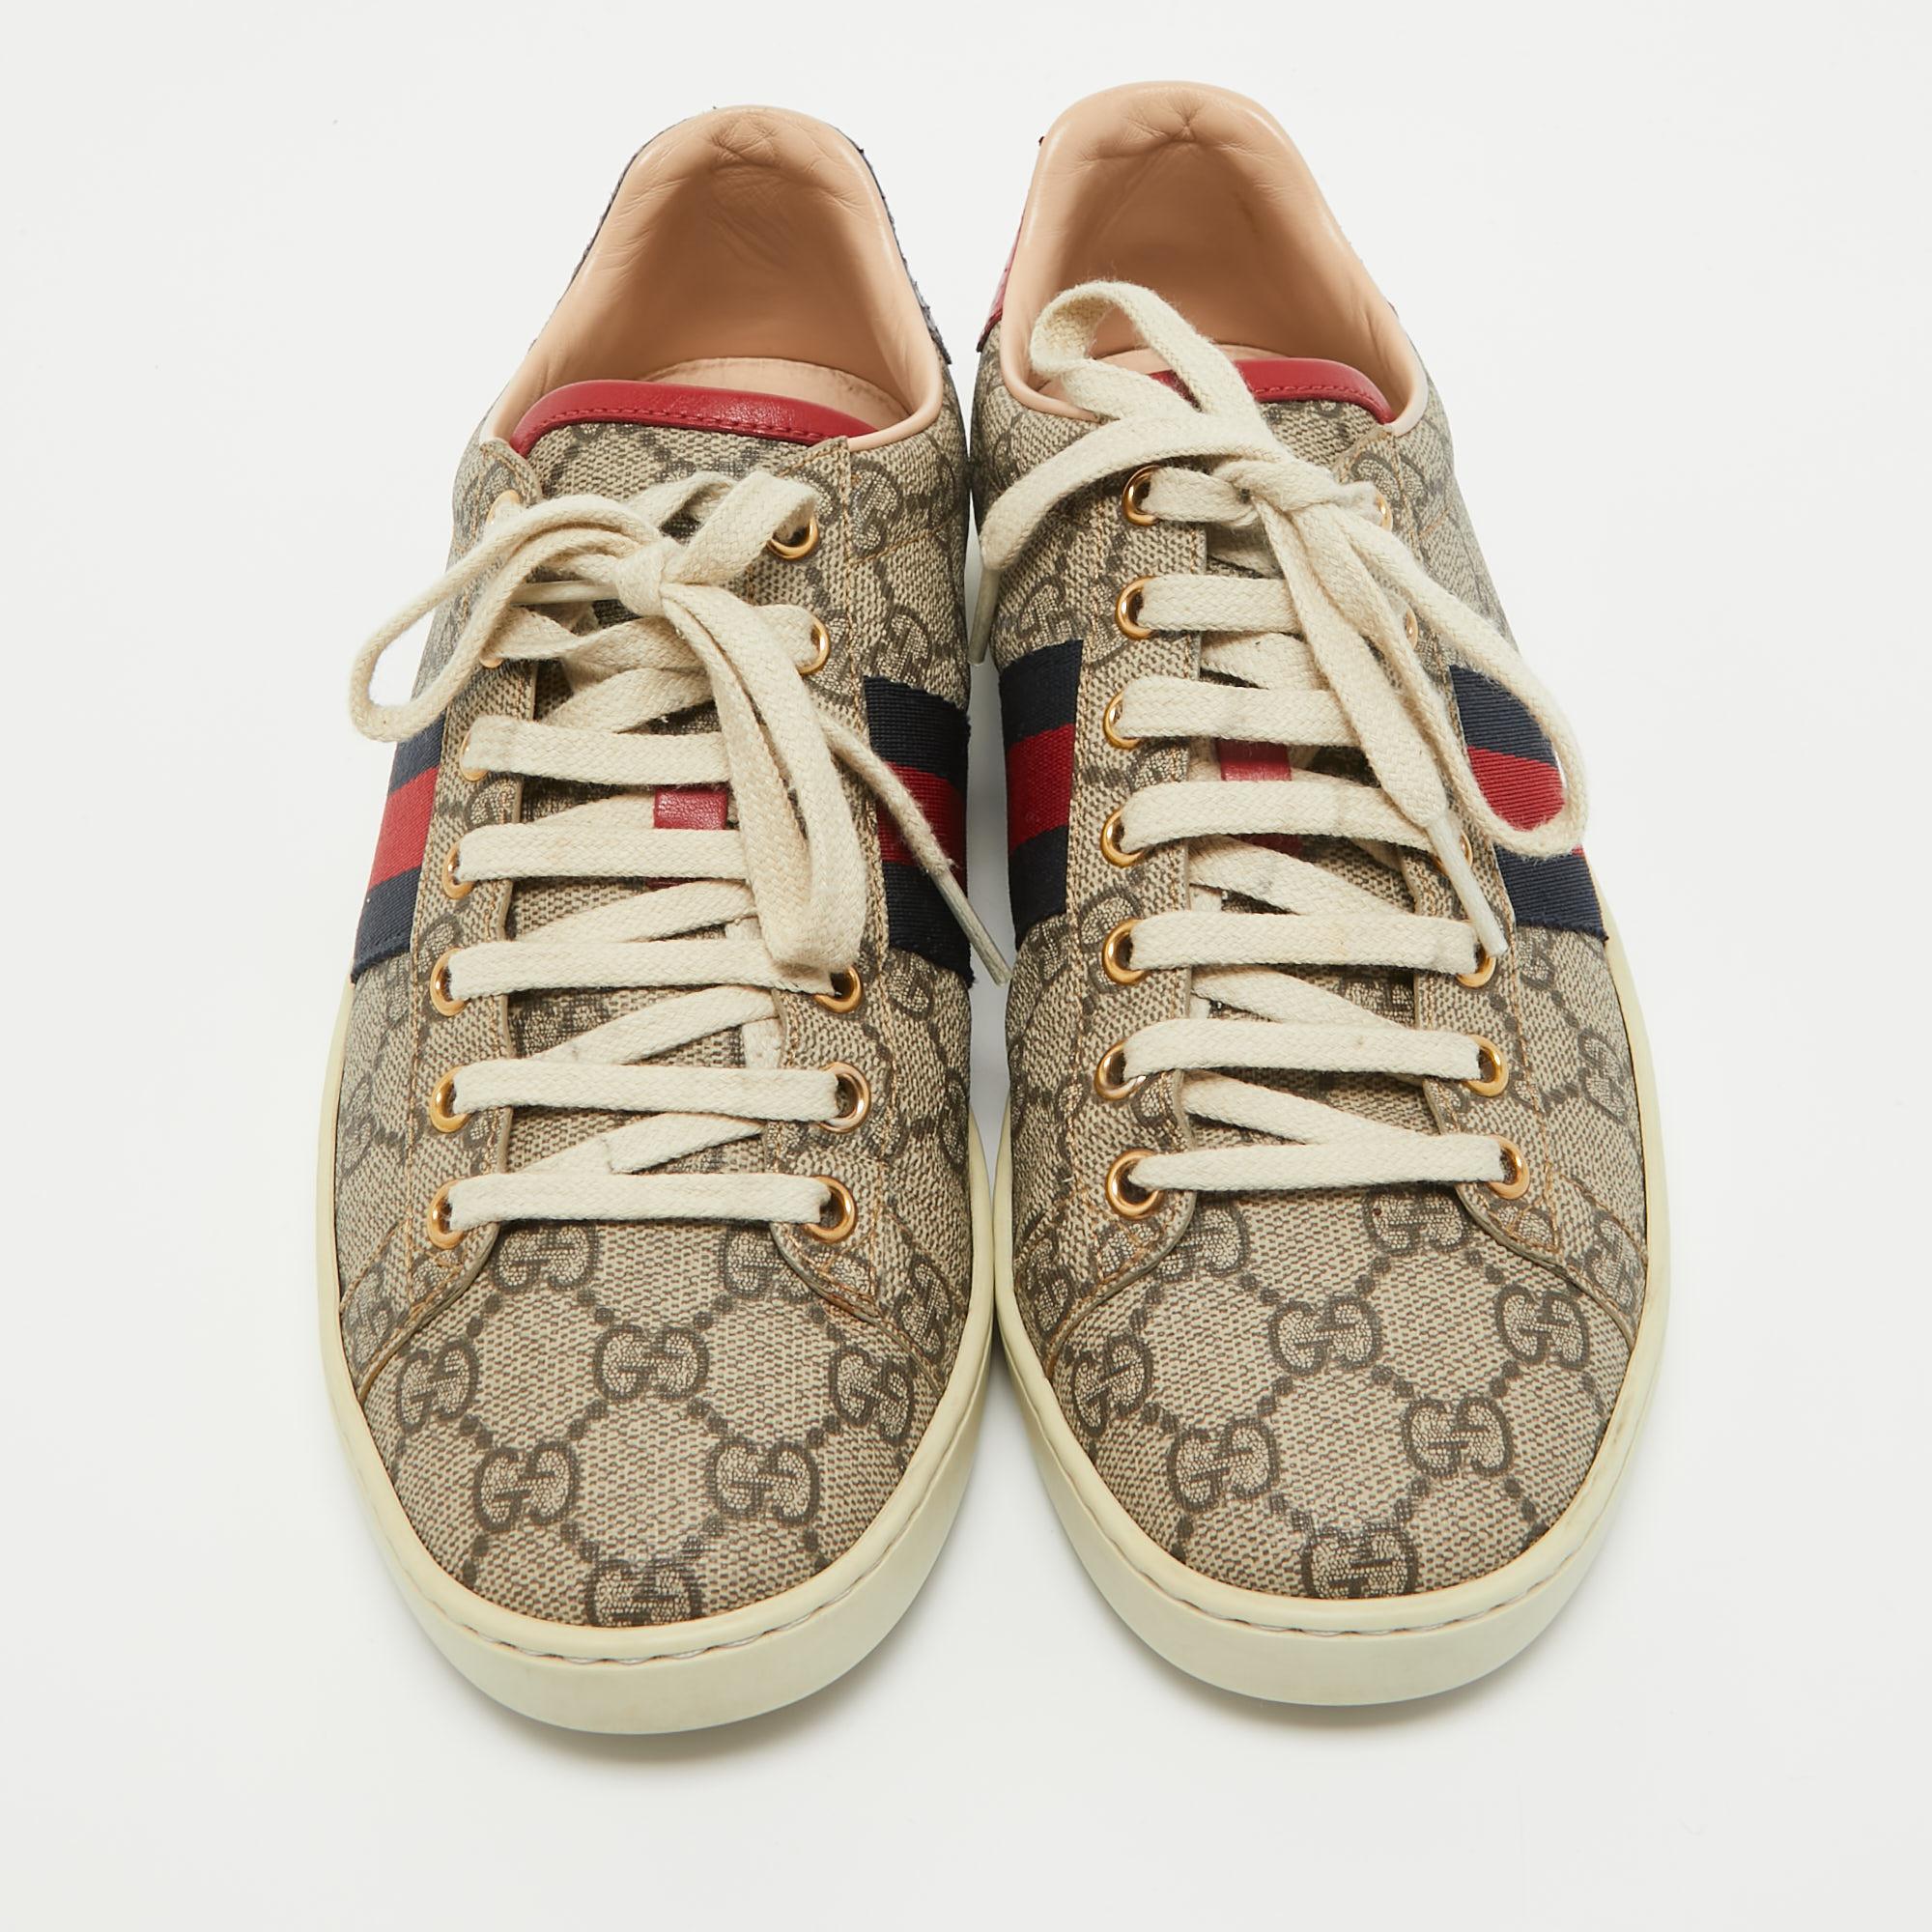 Let this comfortable pair be your first choice when you're out for a long day. These Gucci monogram sneakers have well-sewn uppers beautifully set on durable soles.

